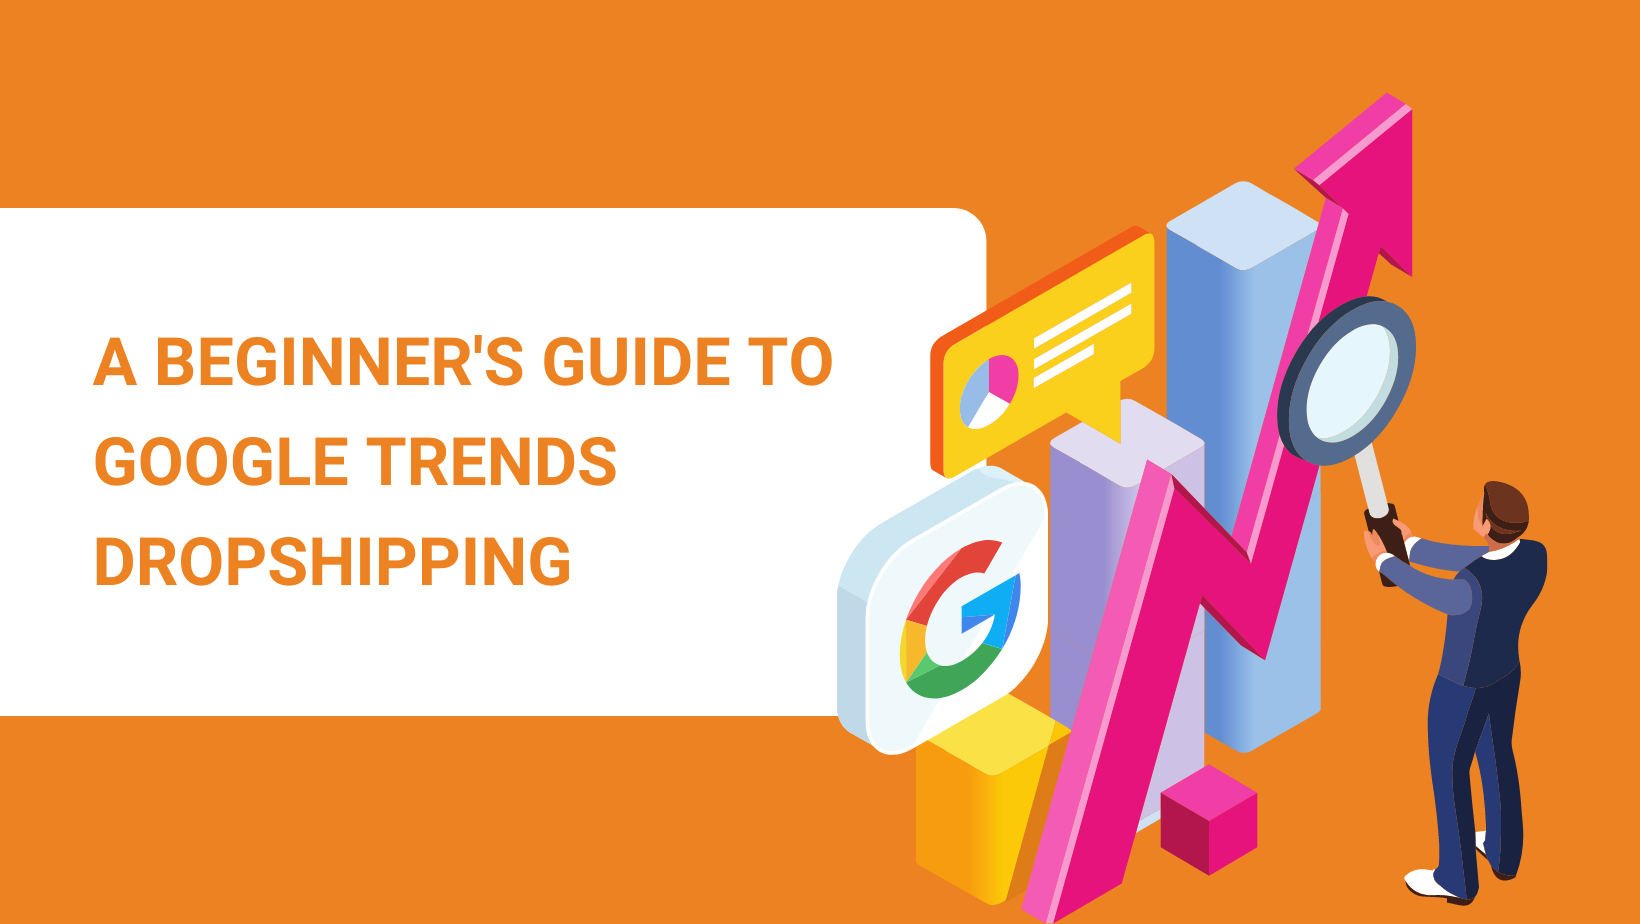 A BEGINNER'S GUIDE TO GOOGLE TRENDS DROPSHIPPING